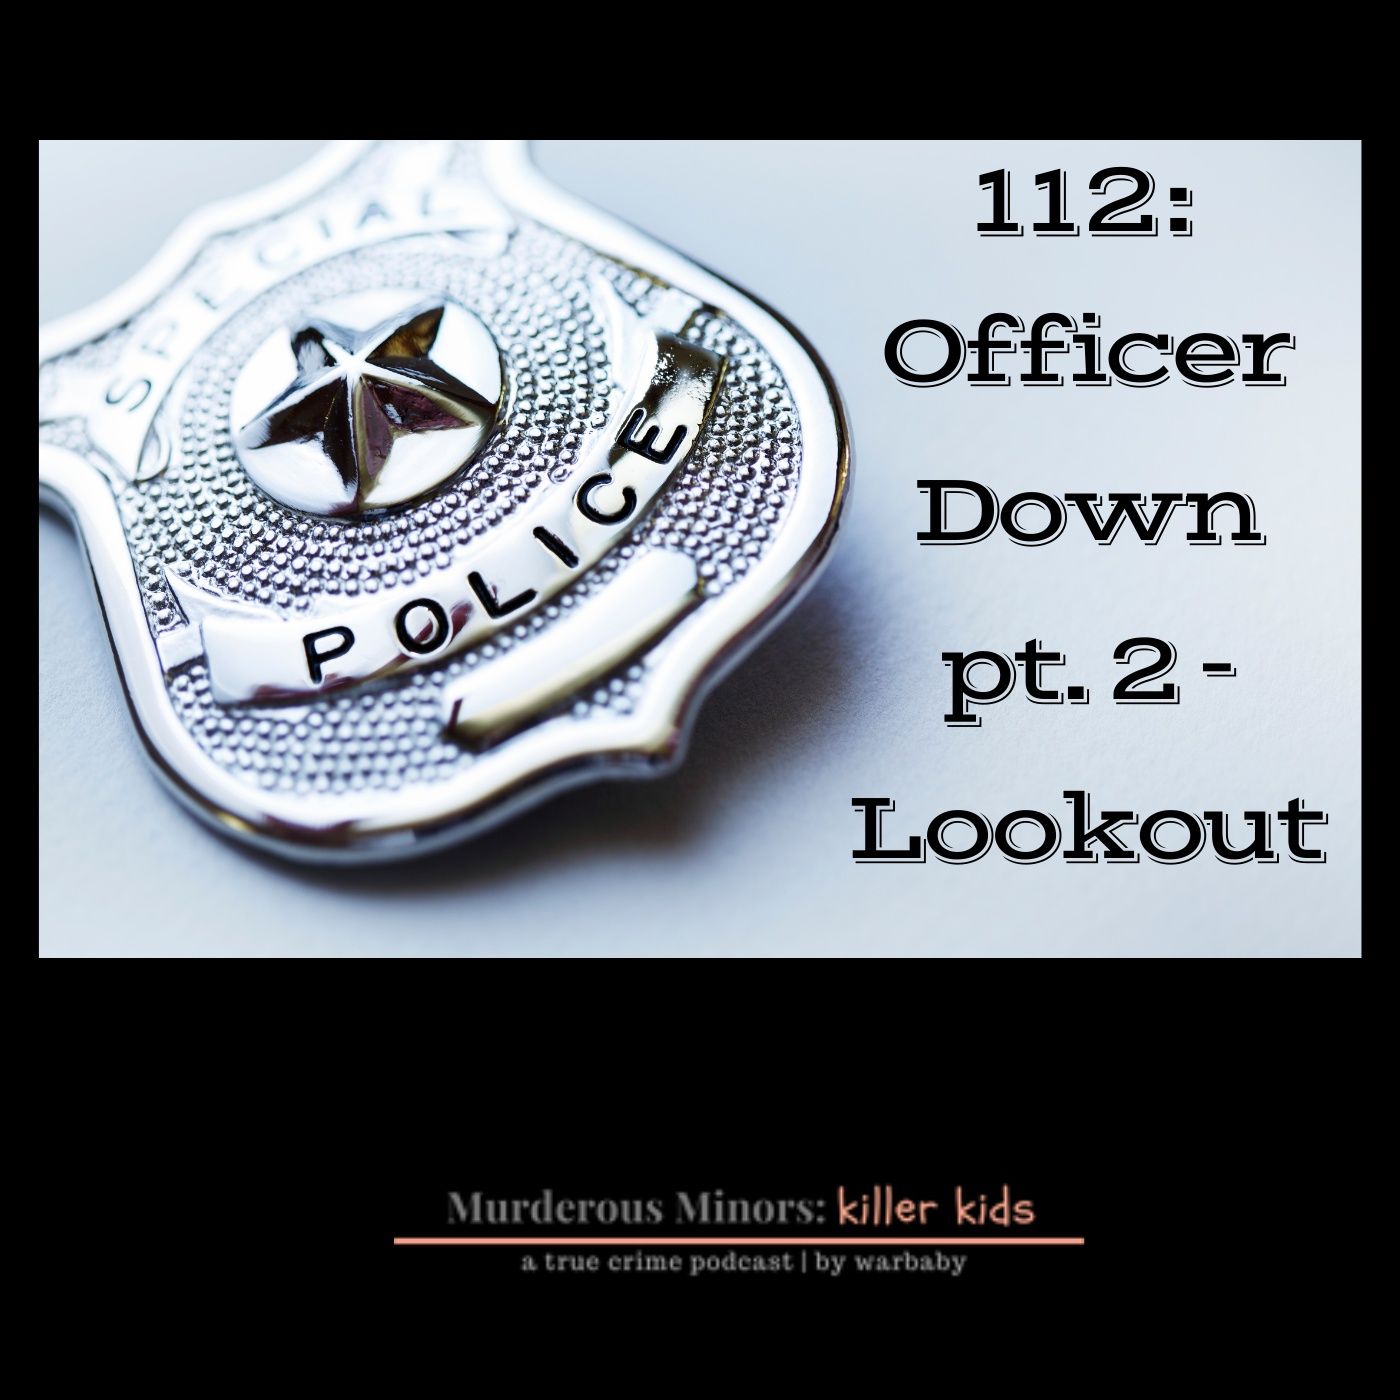 Officer Down Pt. 2 - Lookout: Amy Caprio (Dawnta Harris)